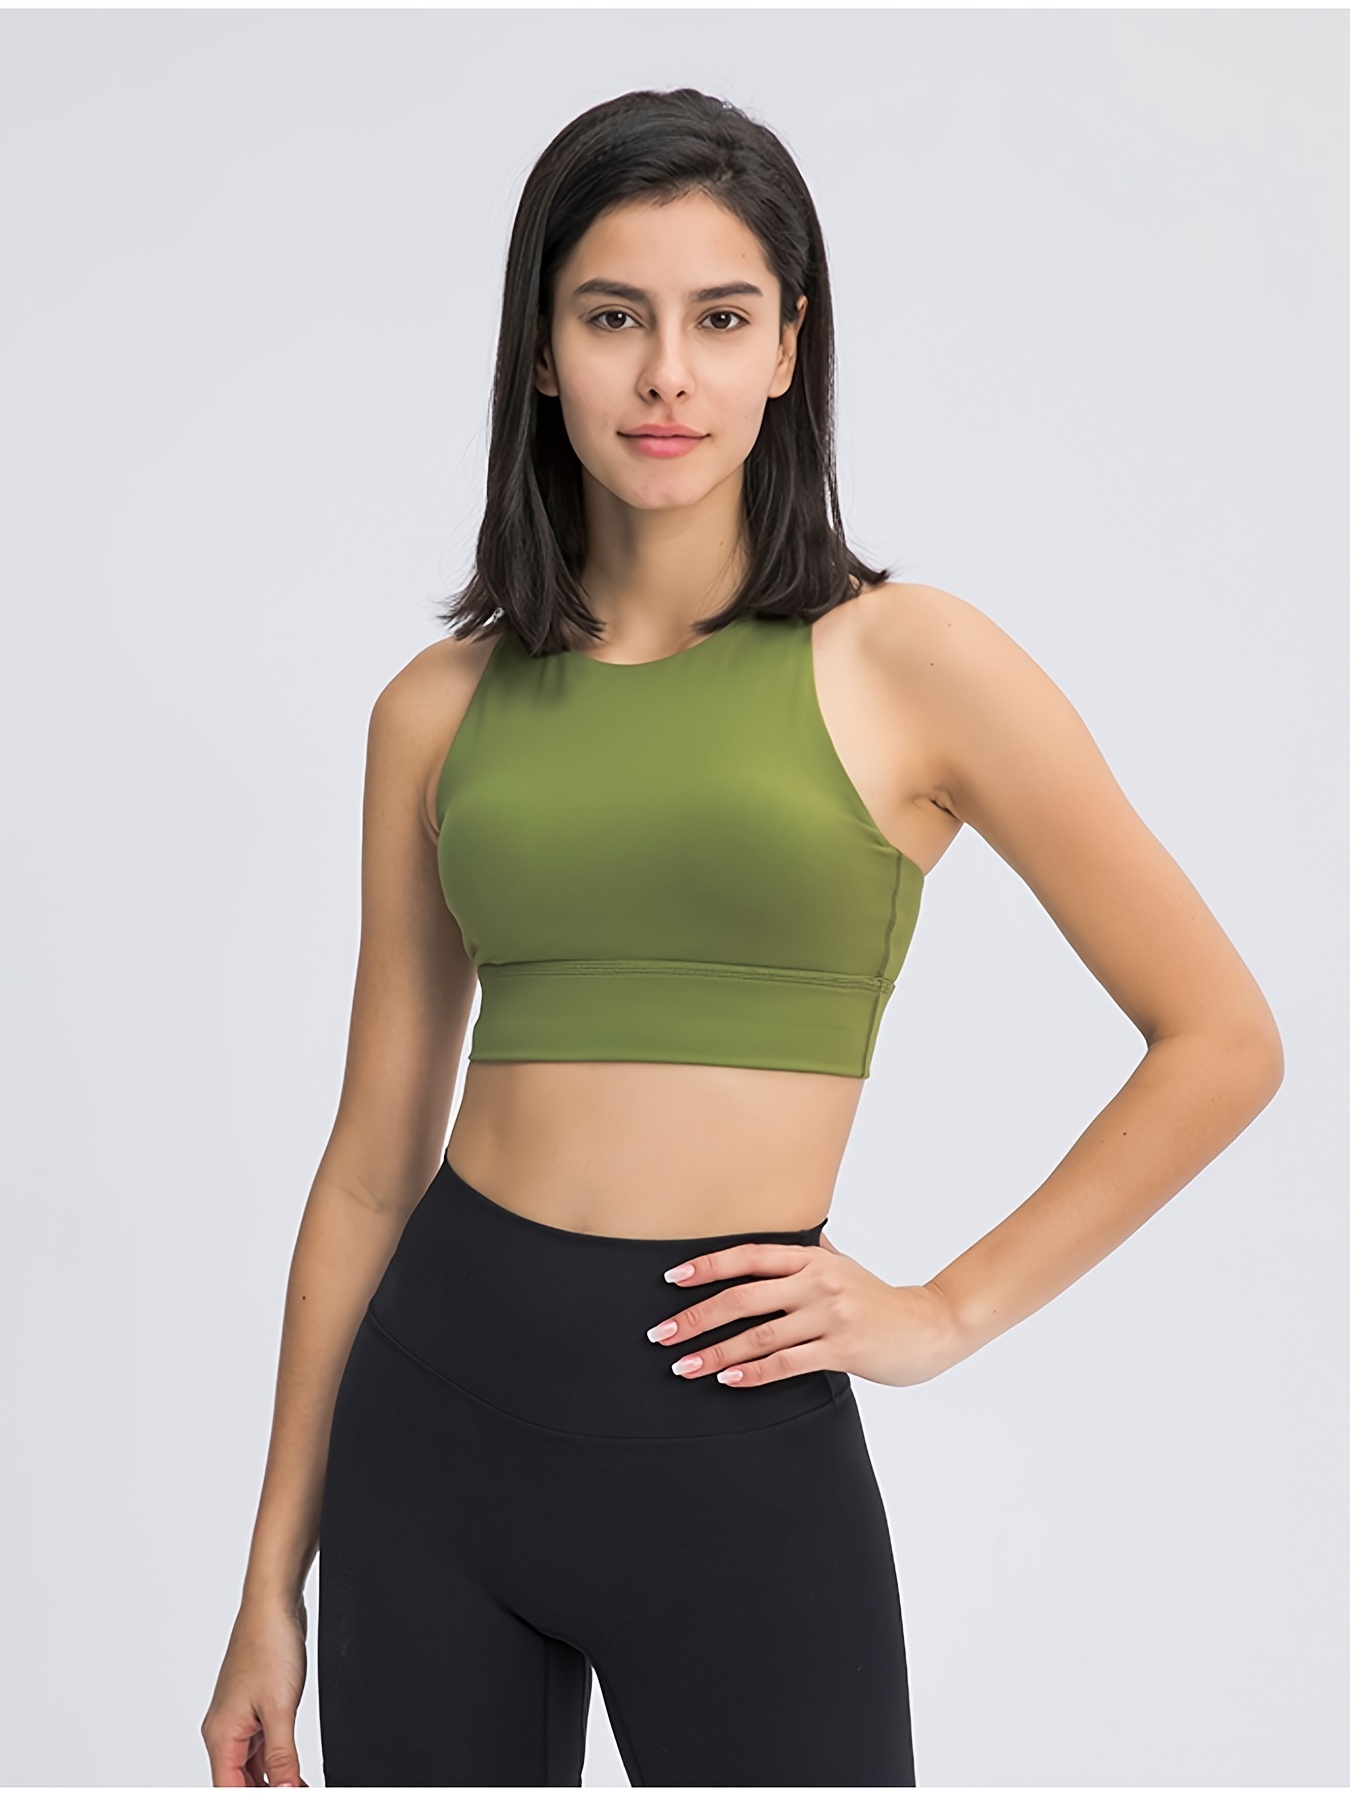 Backless Yoga Crop Tops for Women | Open Back Gym Running Shirts